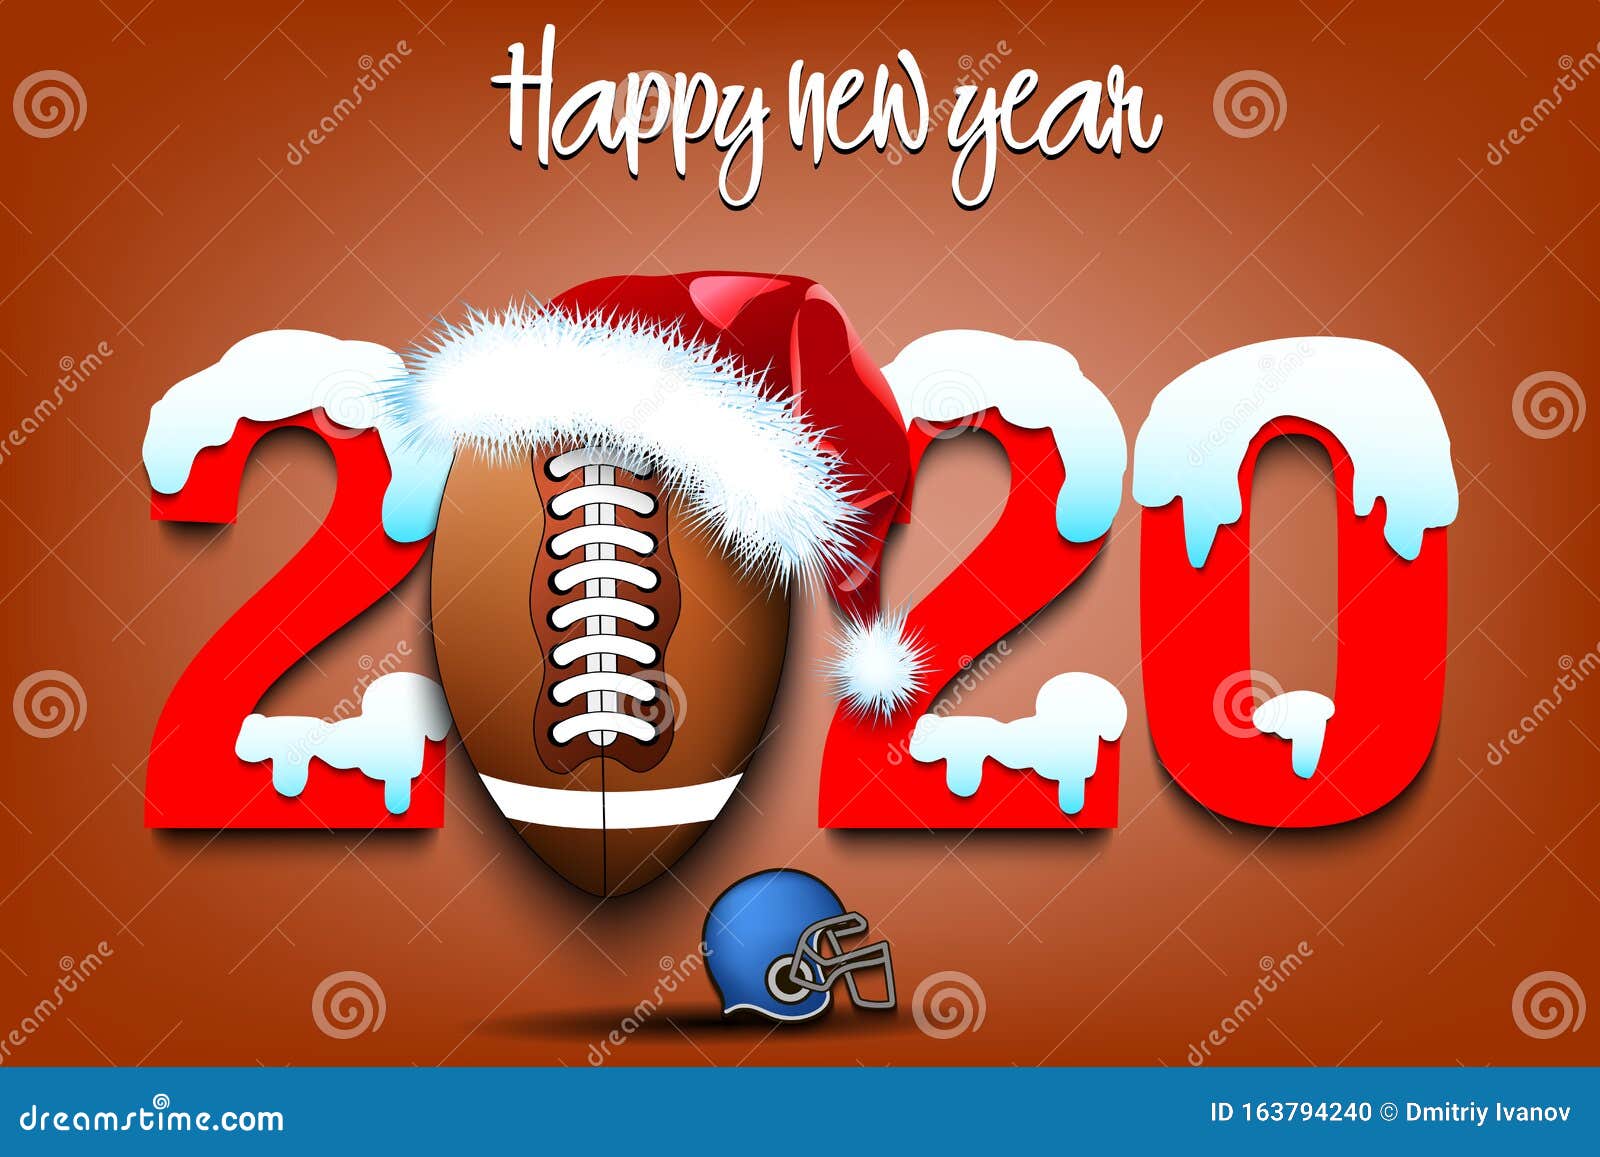 football on christmas eve 2020 Snowy New Year Numbers 2020 And Football Ball Stock Vector Illustration Of Creative Abstract 163794240 football on christmas eve 2020